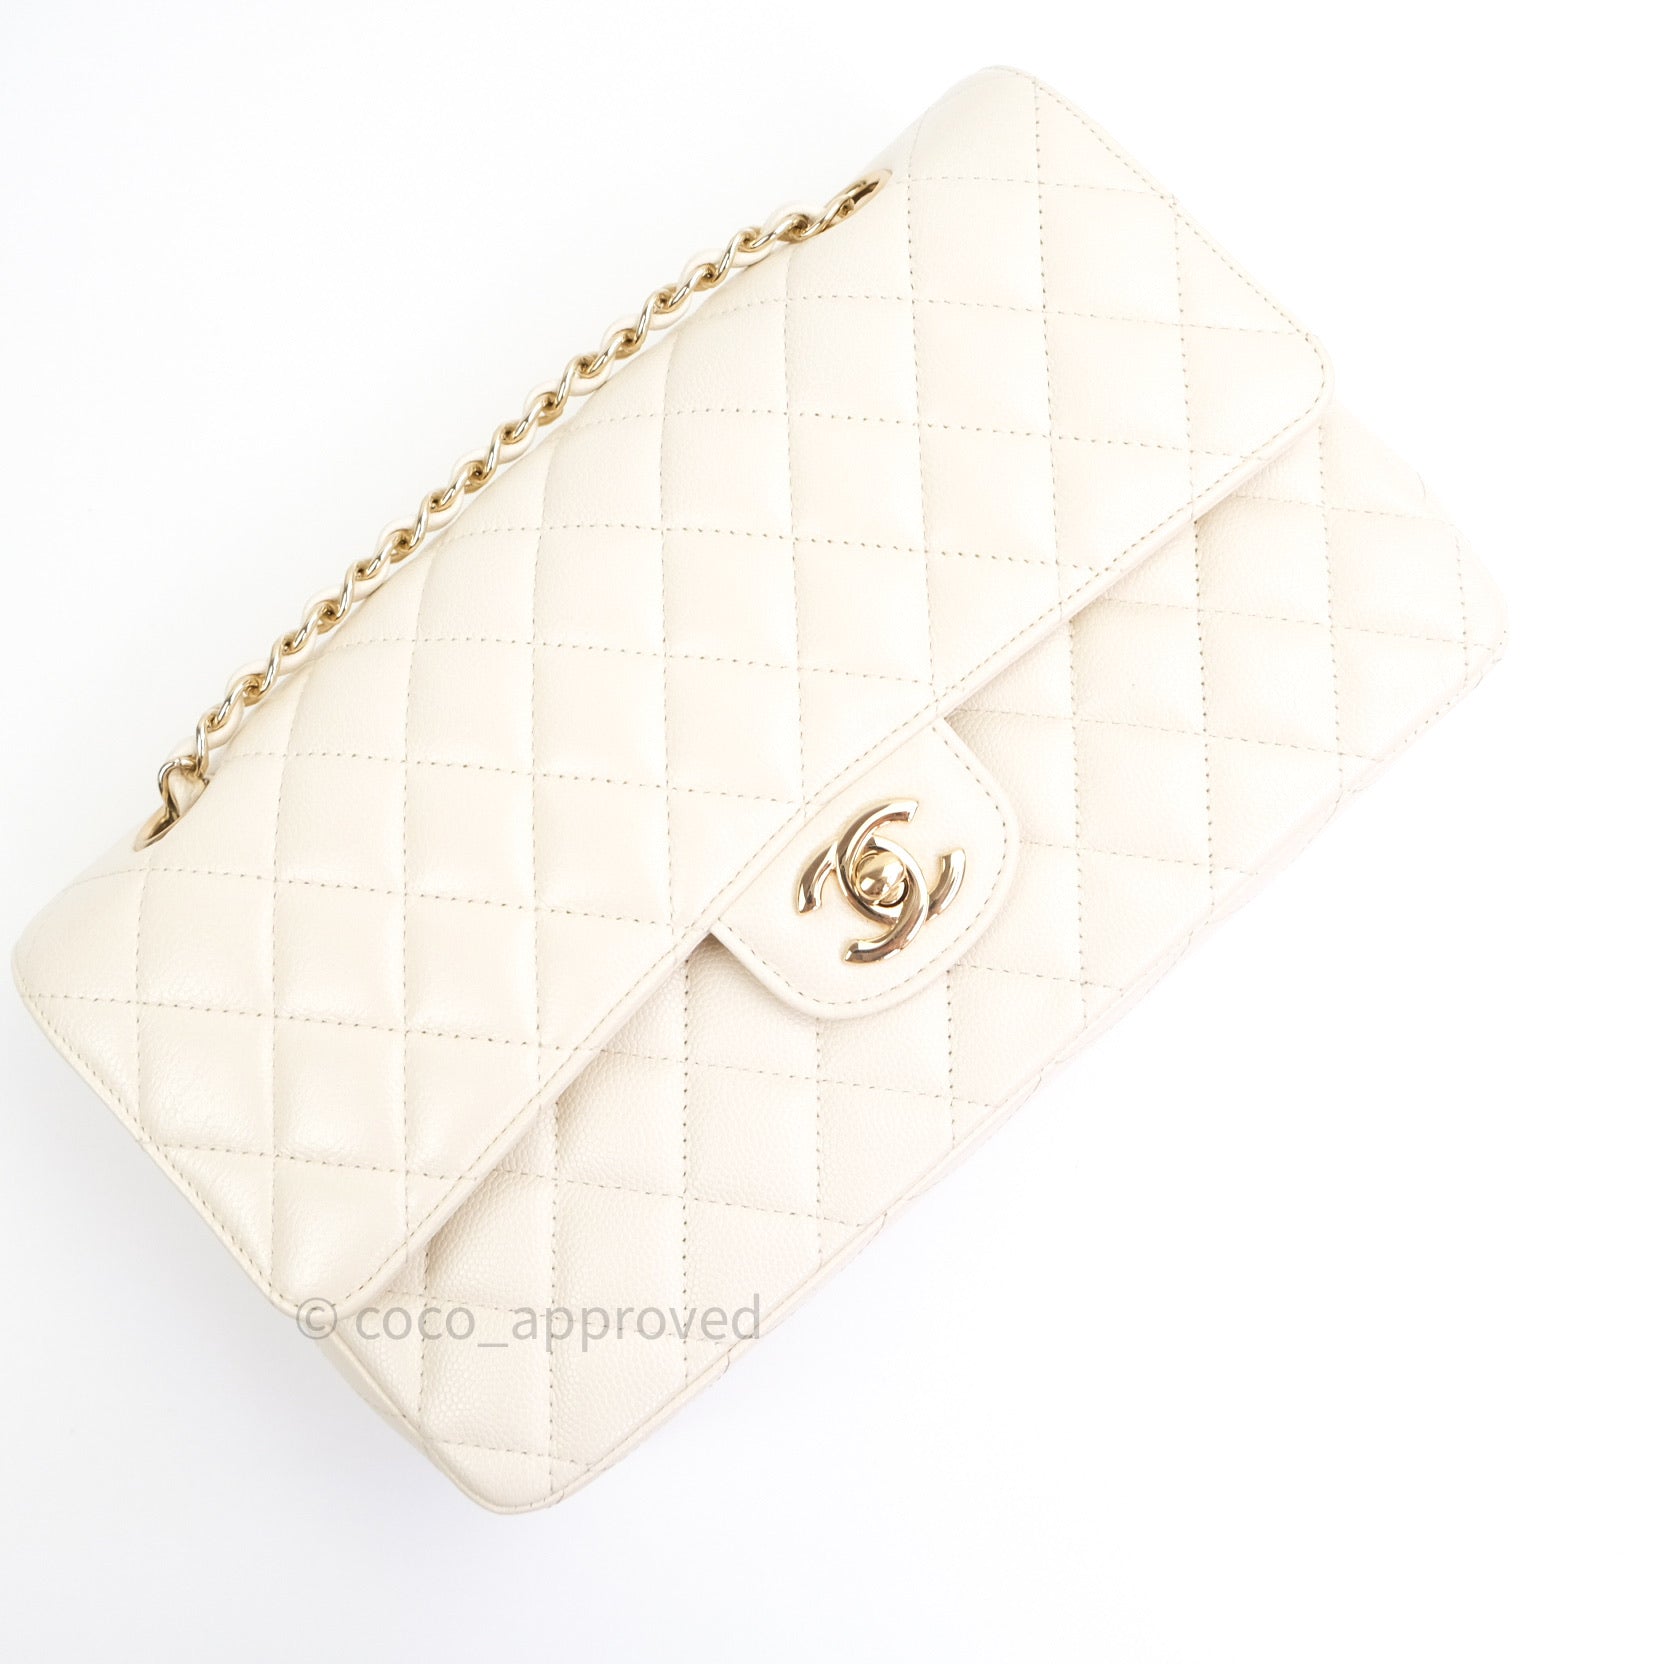 CHANEL CHANEL Caviar Small Bags & Handbags for Women, Authenticity  Guaranteed